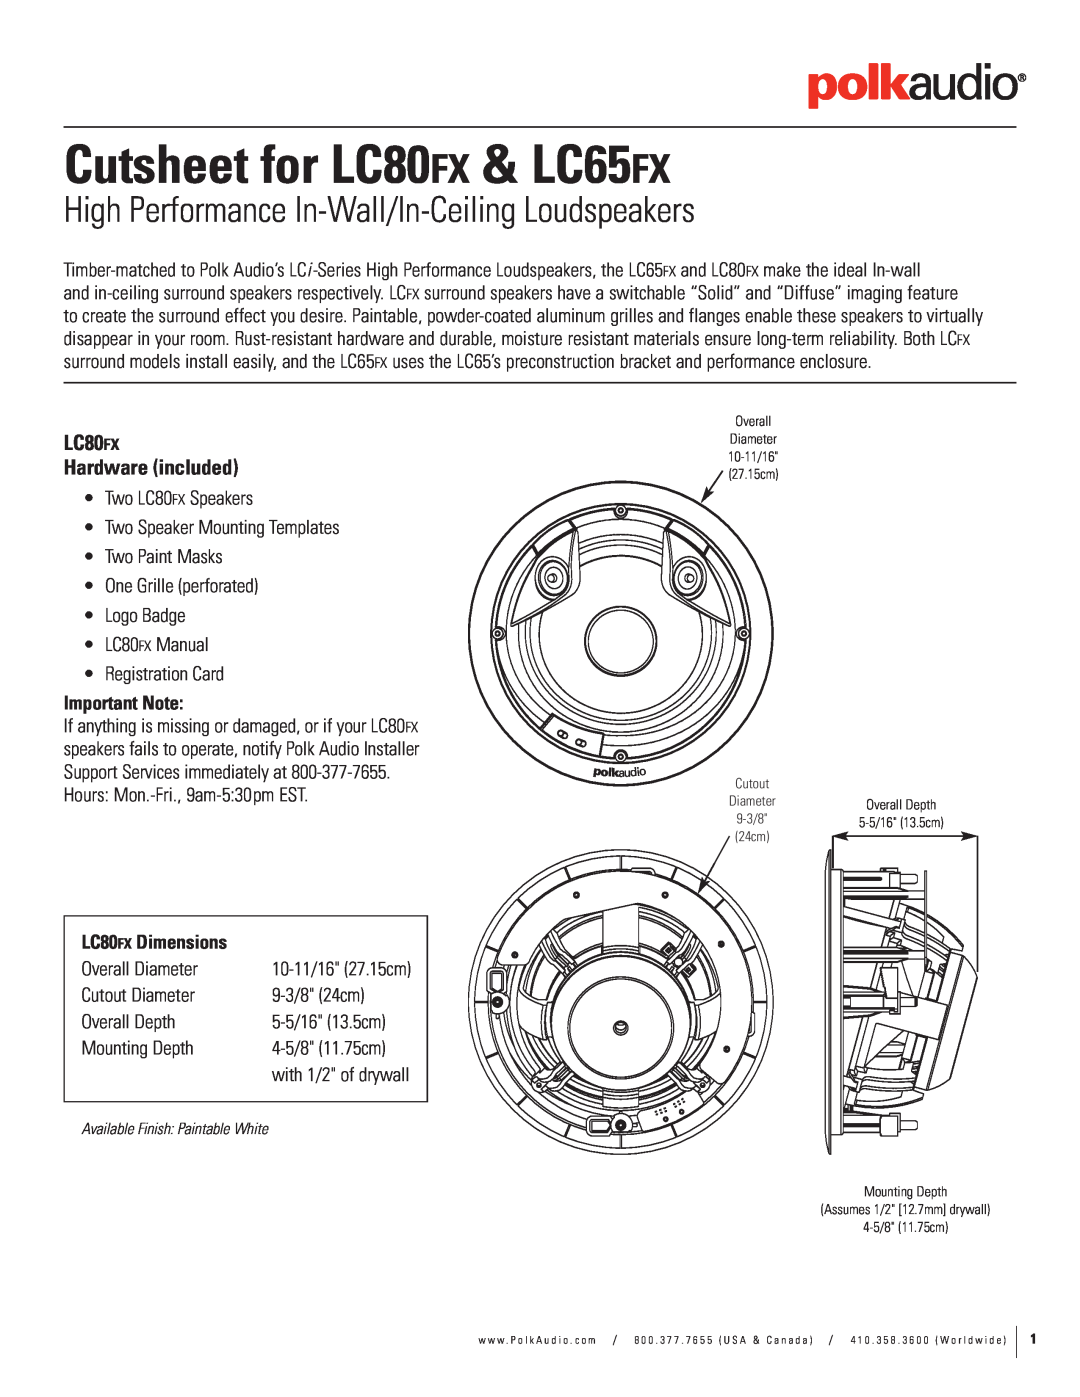 Polk Audio LC80fx dimensions LC80FX Hardware included, Important Note, LC80FX Dimensions, Cutsheet for LC80FX & LC65FX 